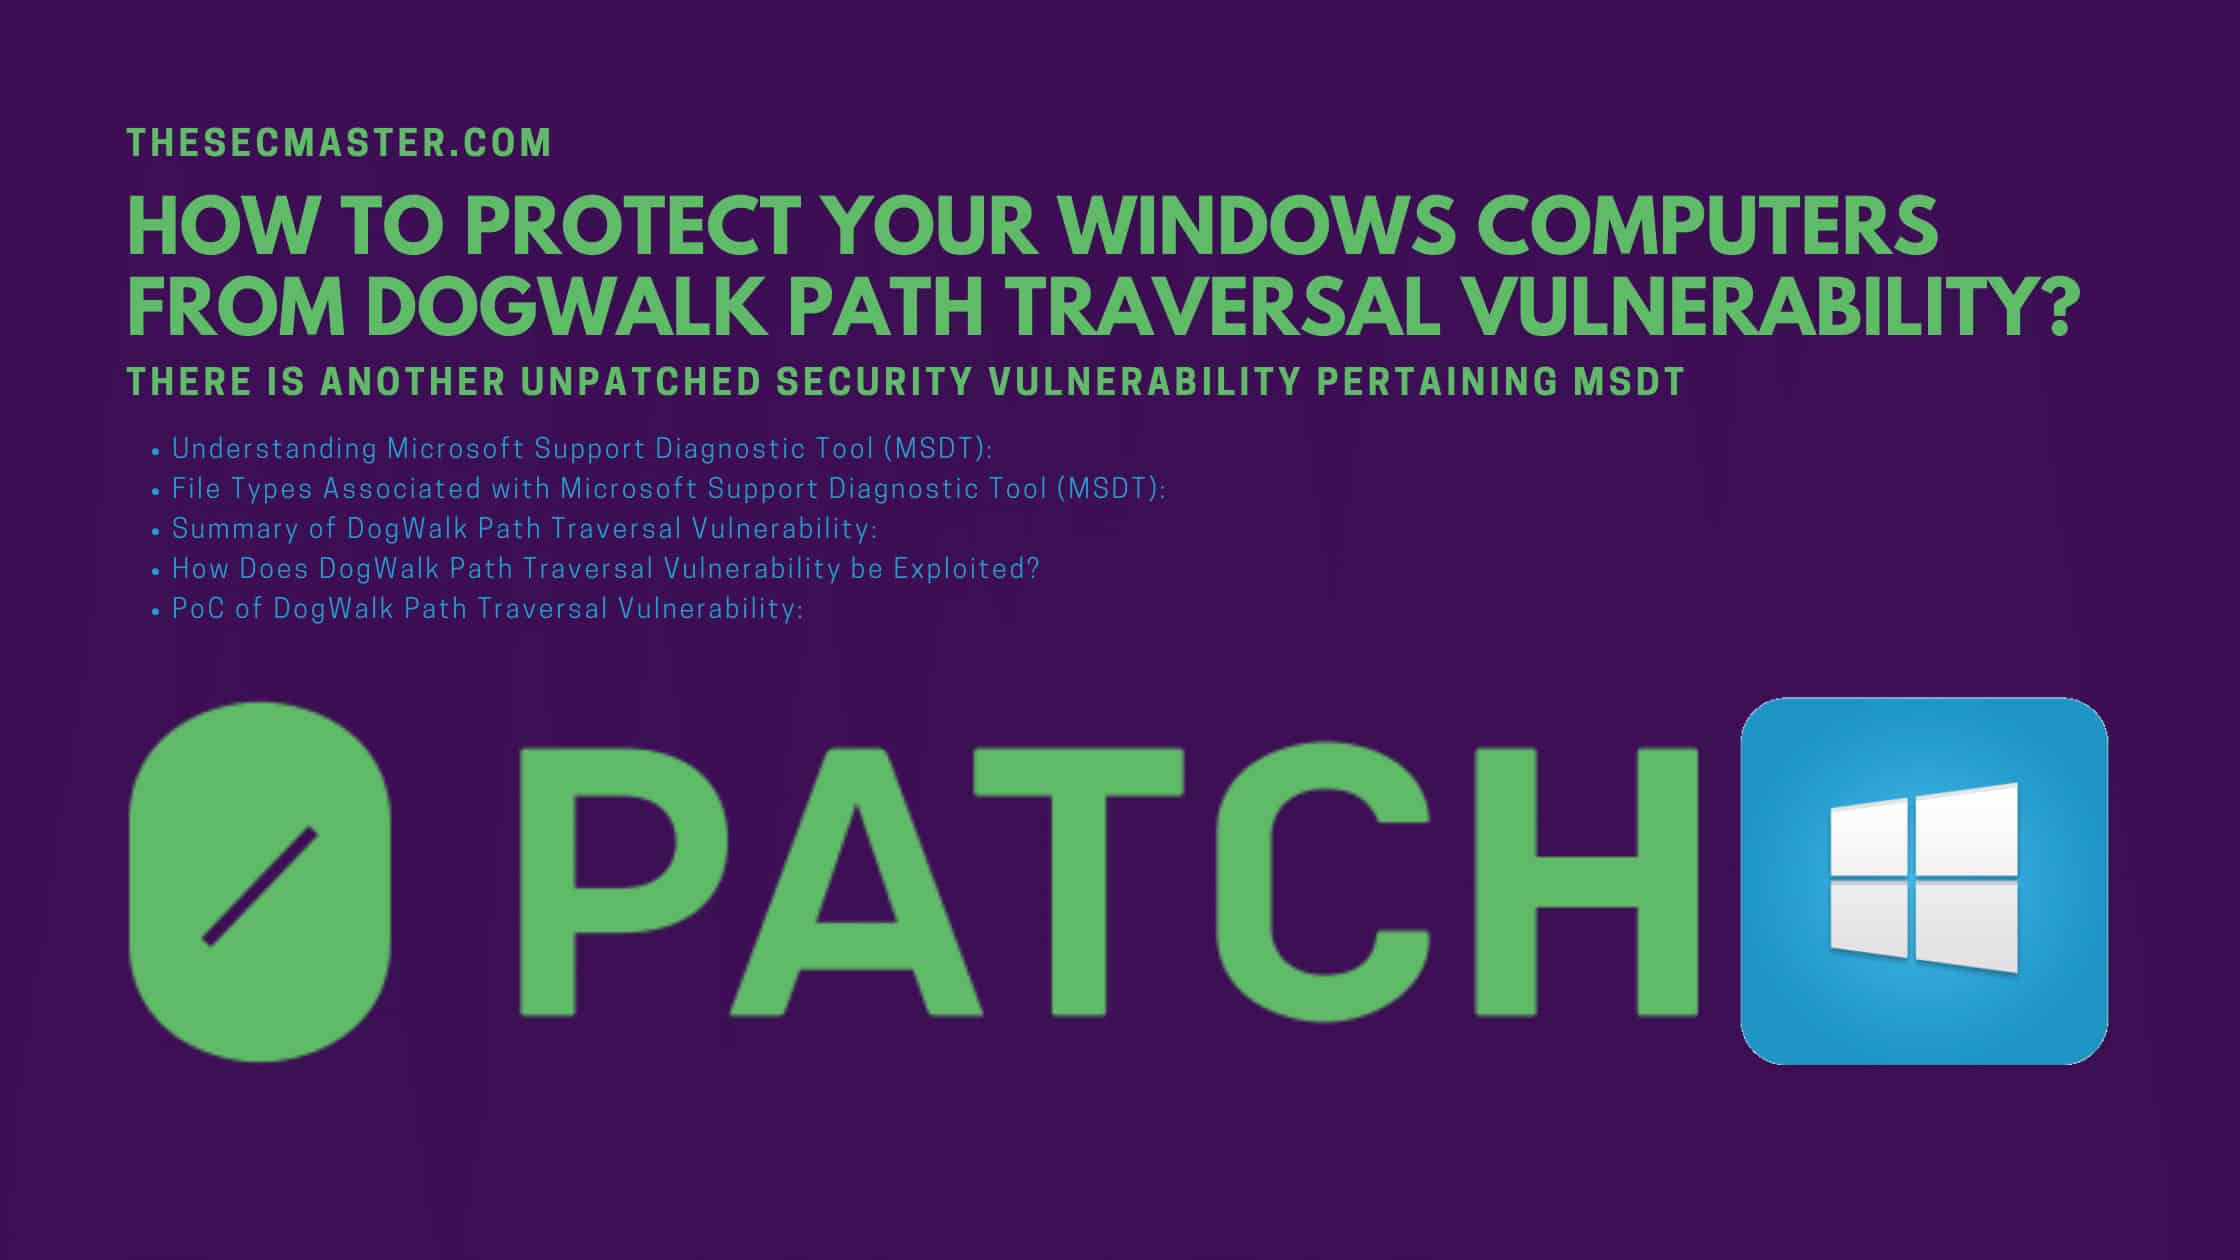 How To Protect Your Windows Computers From Dogwalk Path Traversal Vulnerability